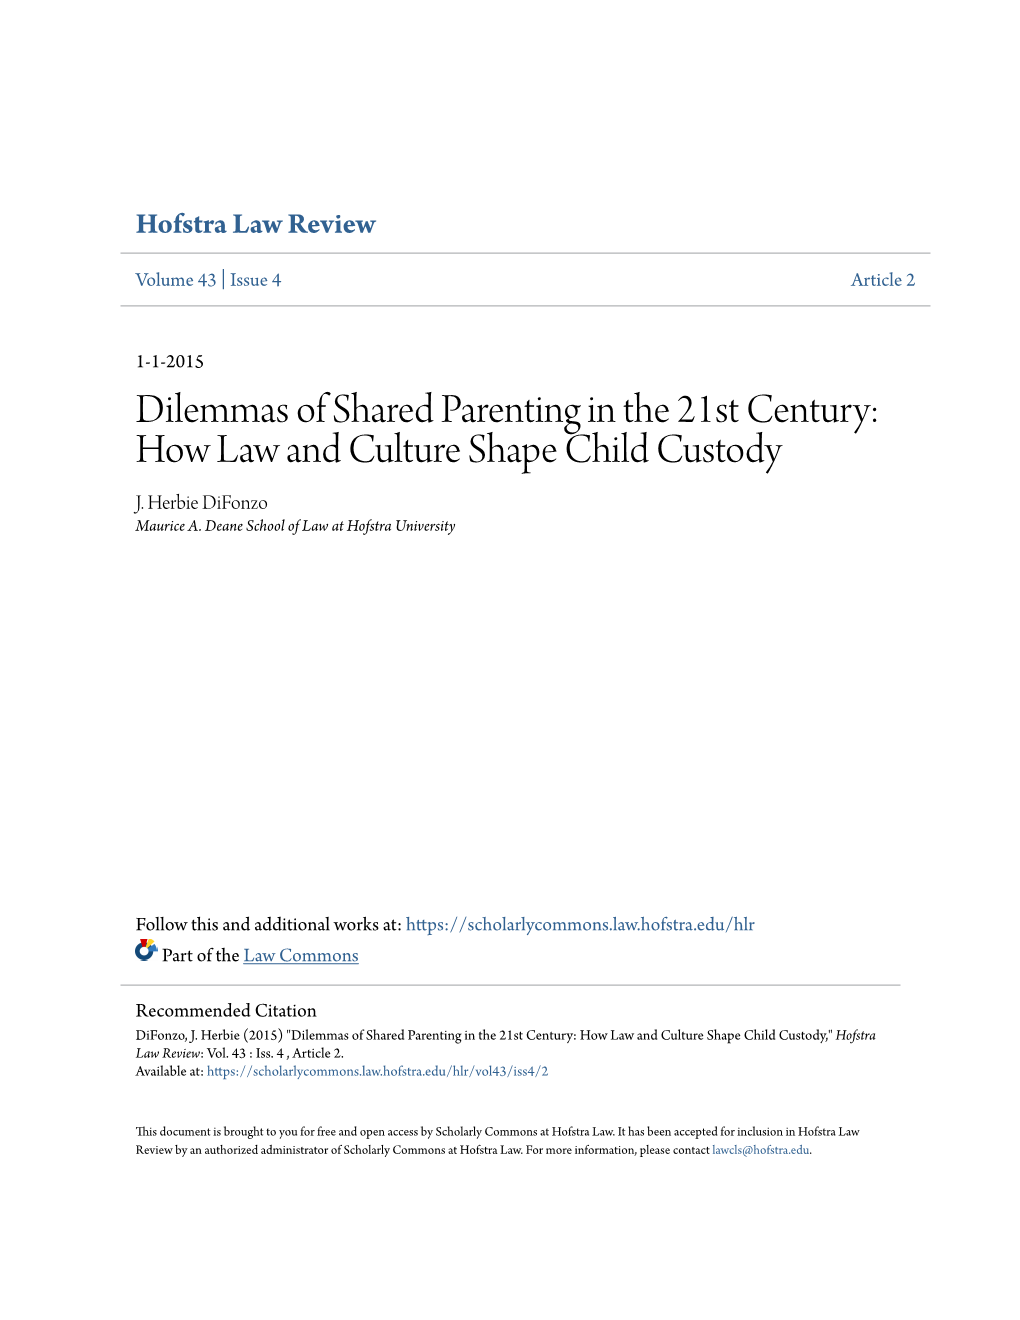 Dilemmas of Shared Parenting in the 21St Century: How Law and Culture Shape Child Custody J